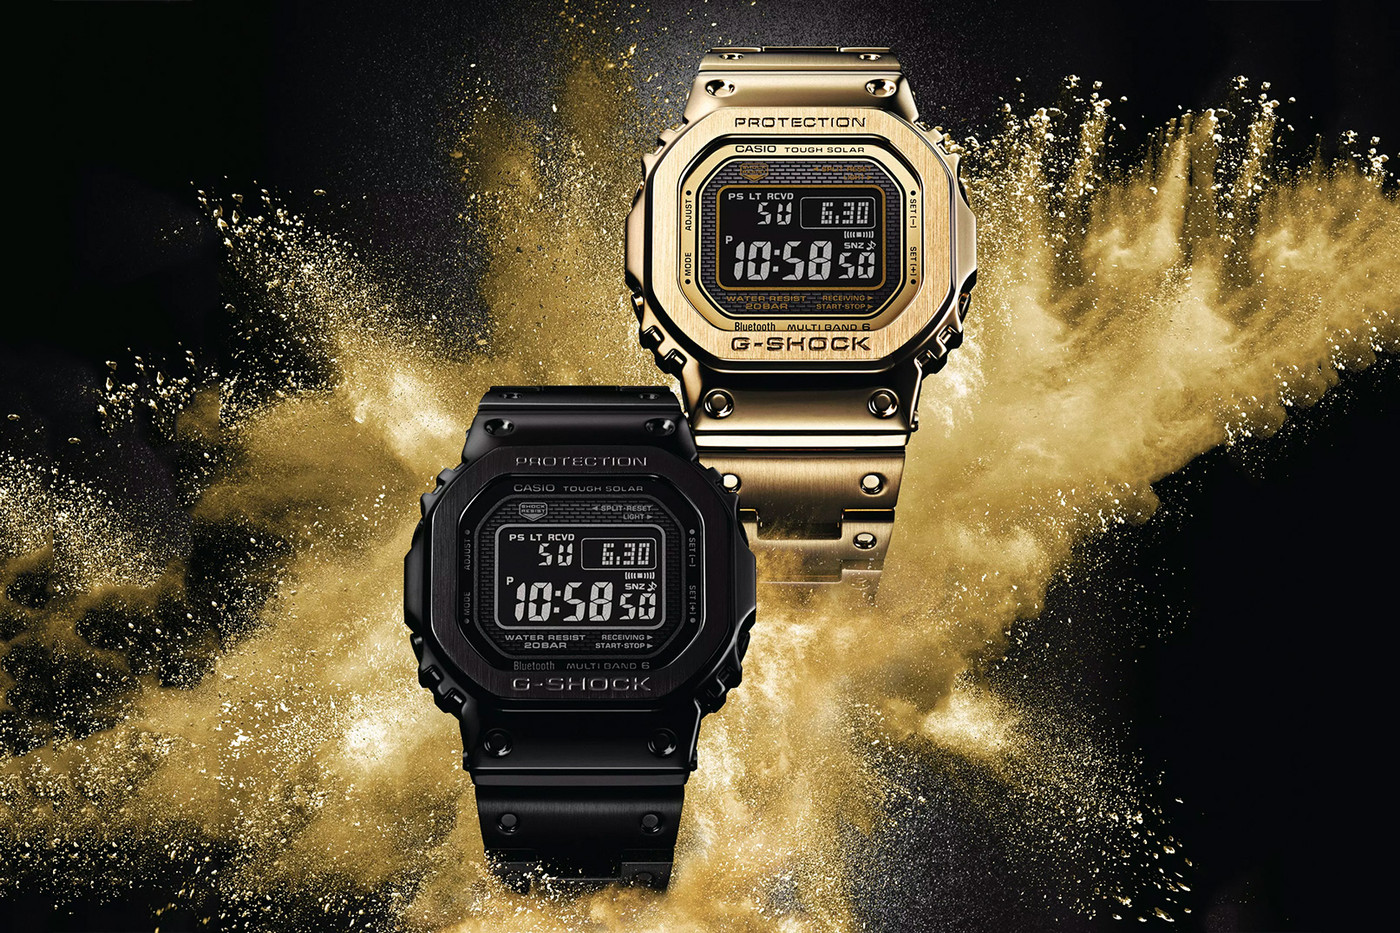 New Models Are Set to Receive G-SHOCK’s “Full Metal” 5000 Collection Revamp